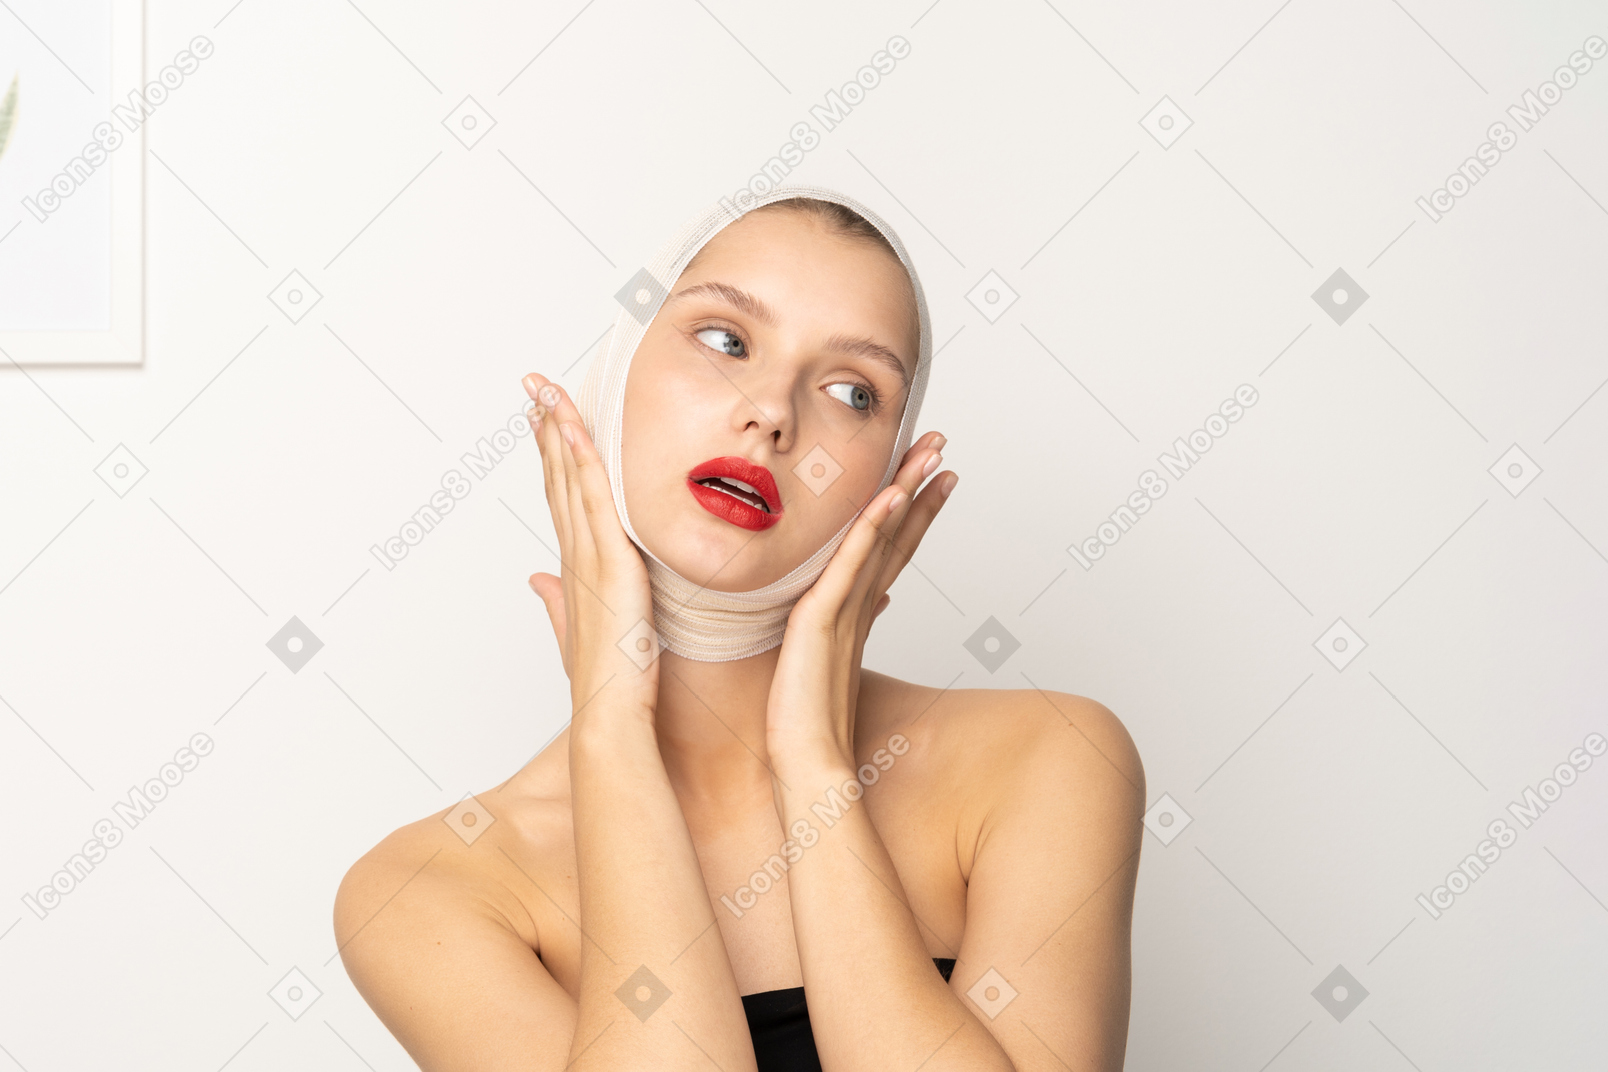 Young woman holding her face with both hands